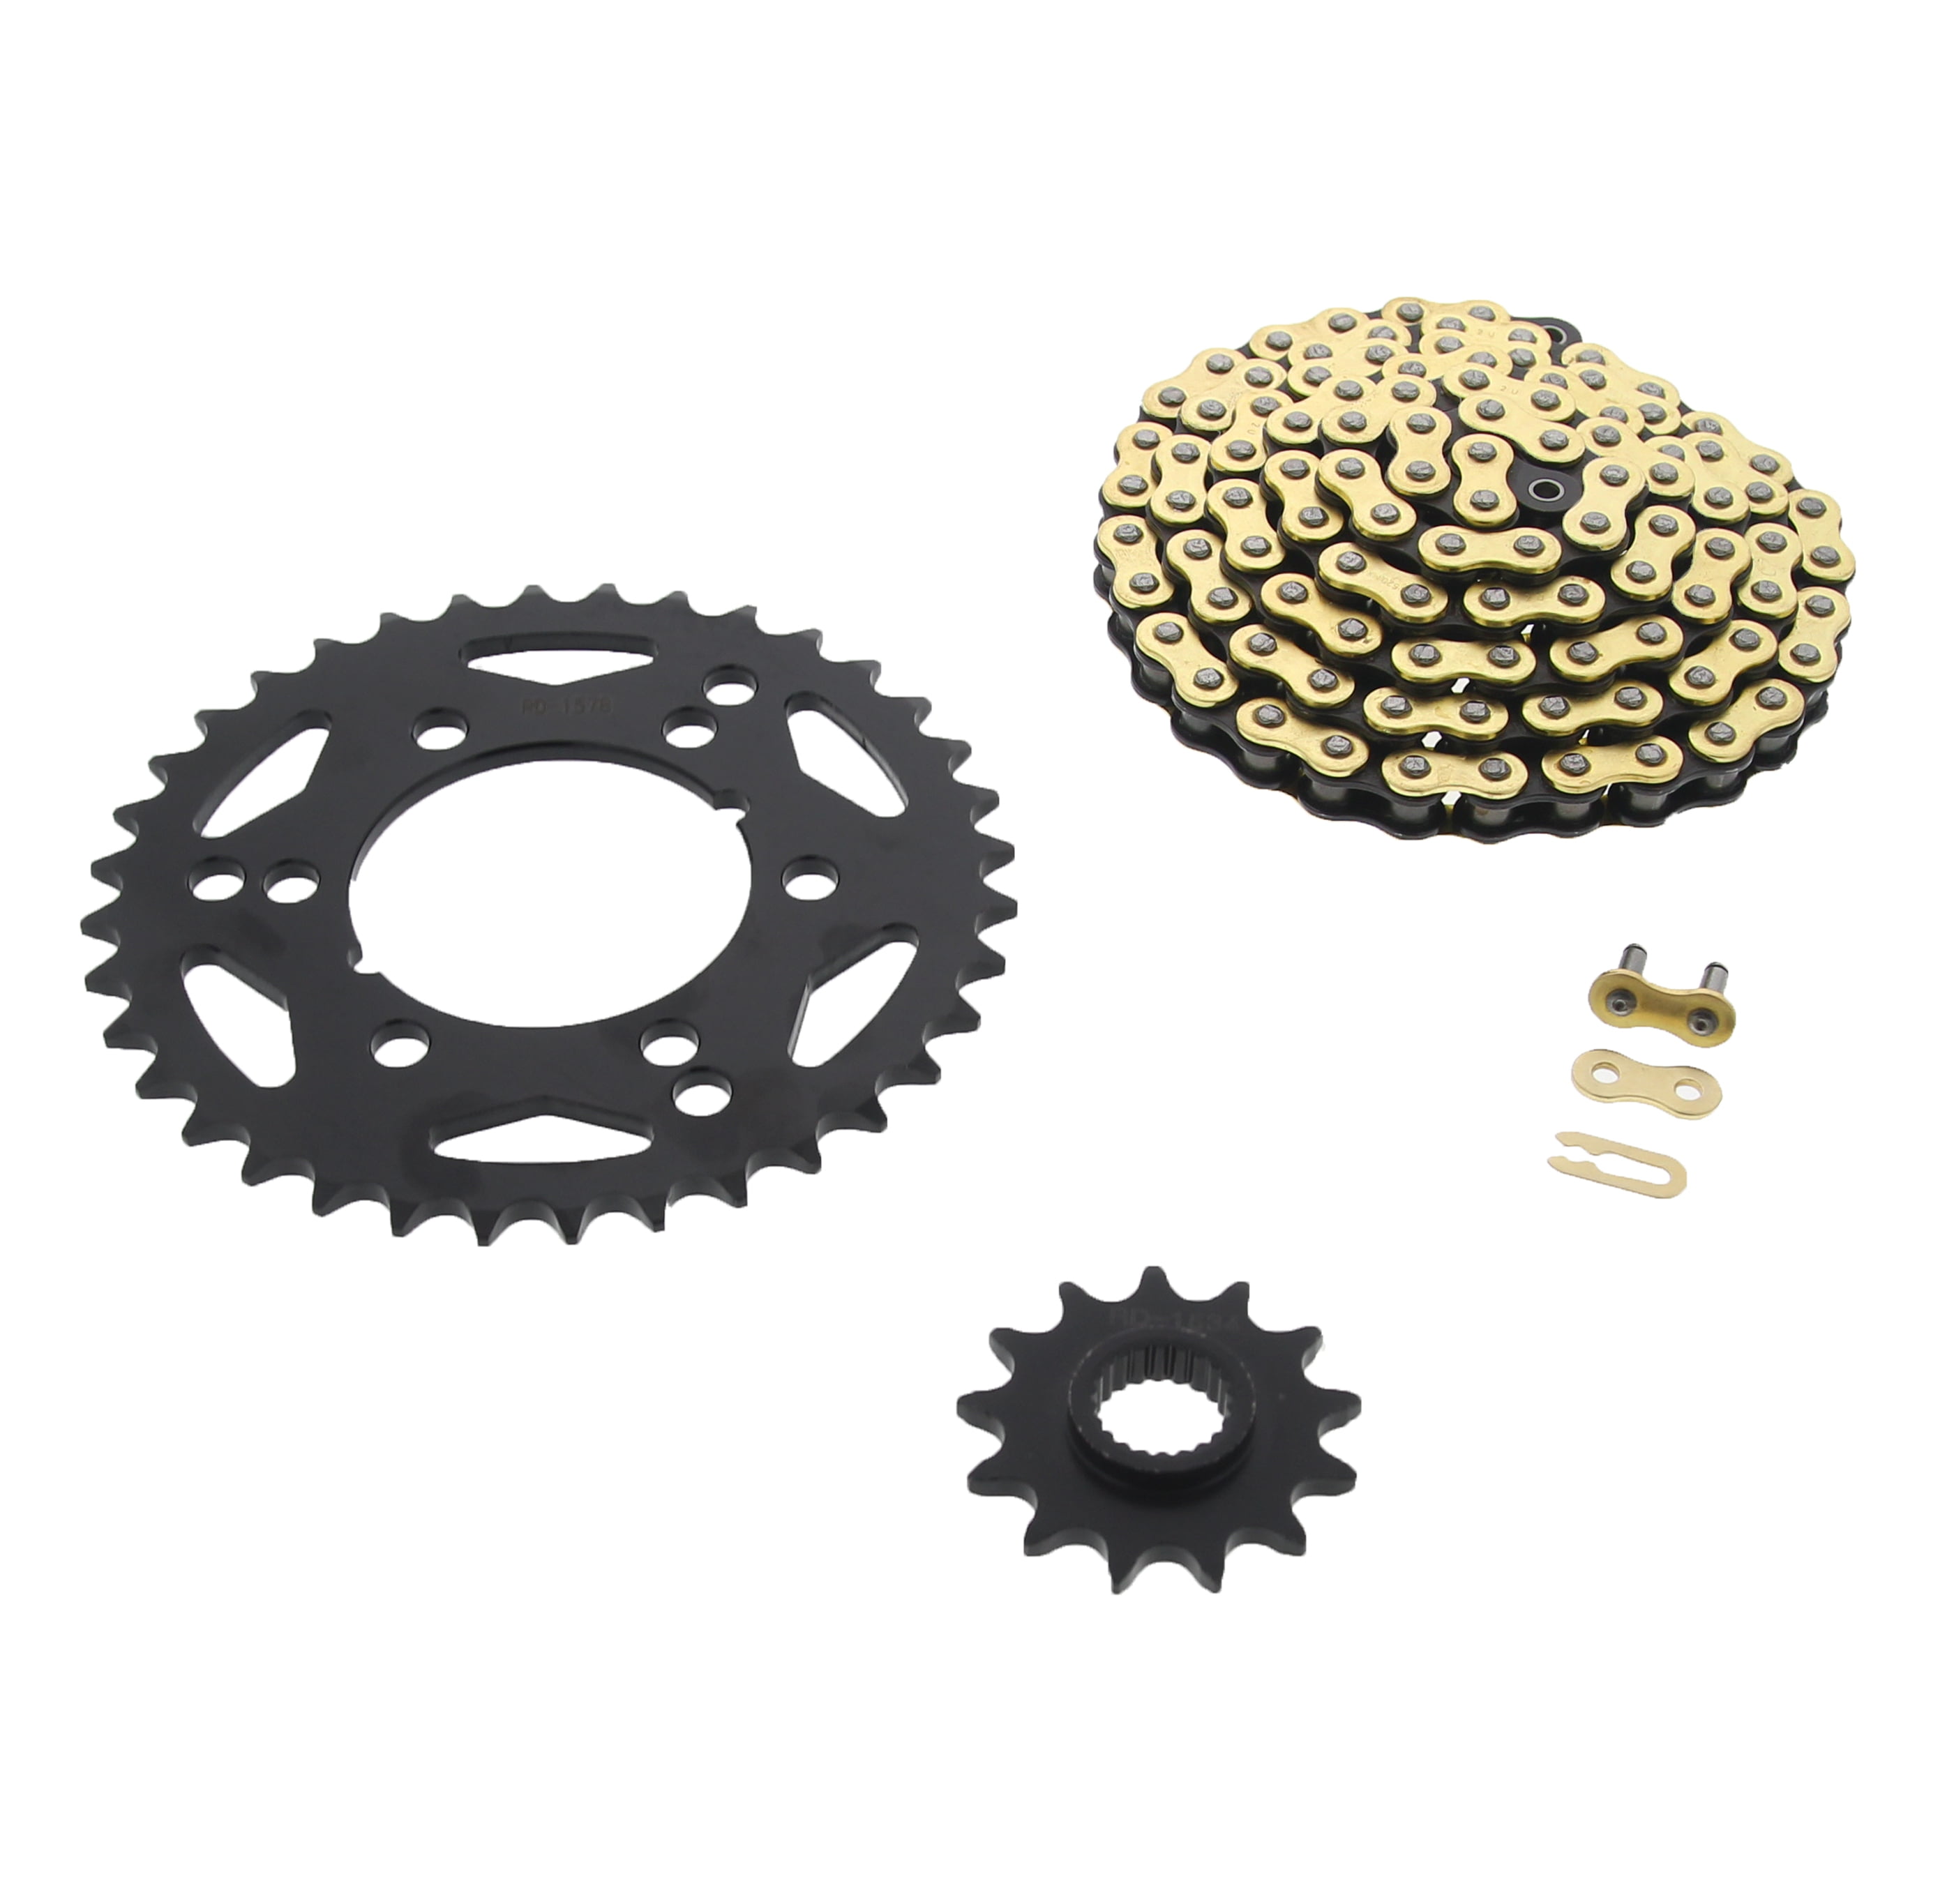 Polaris 300 4x4 Gold O Ring Chains & Complete Sprocket Set